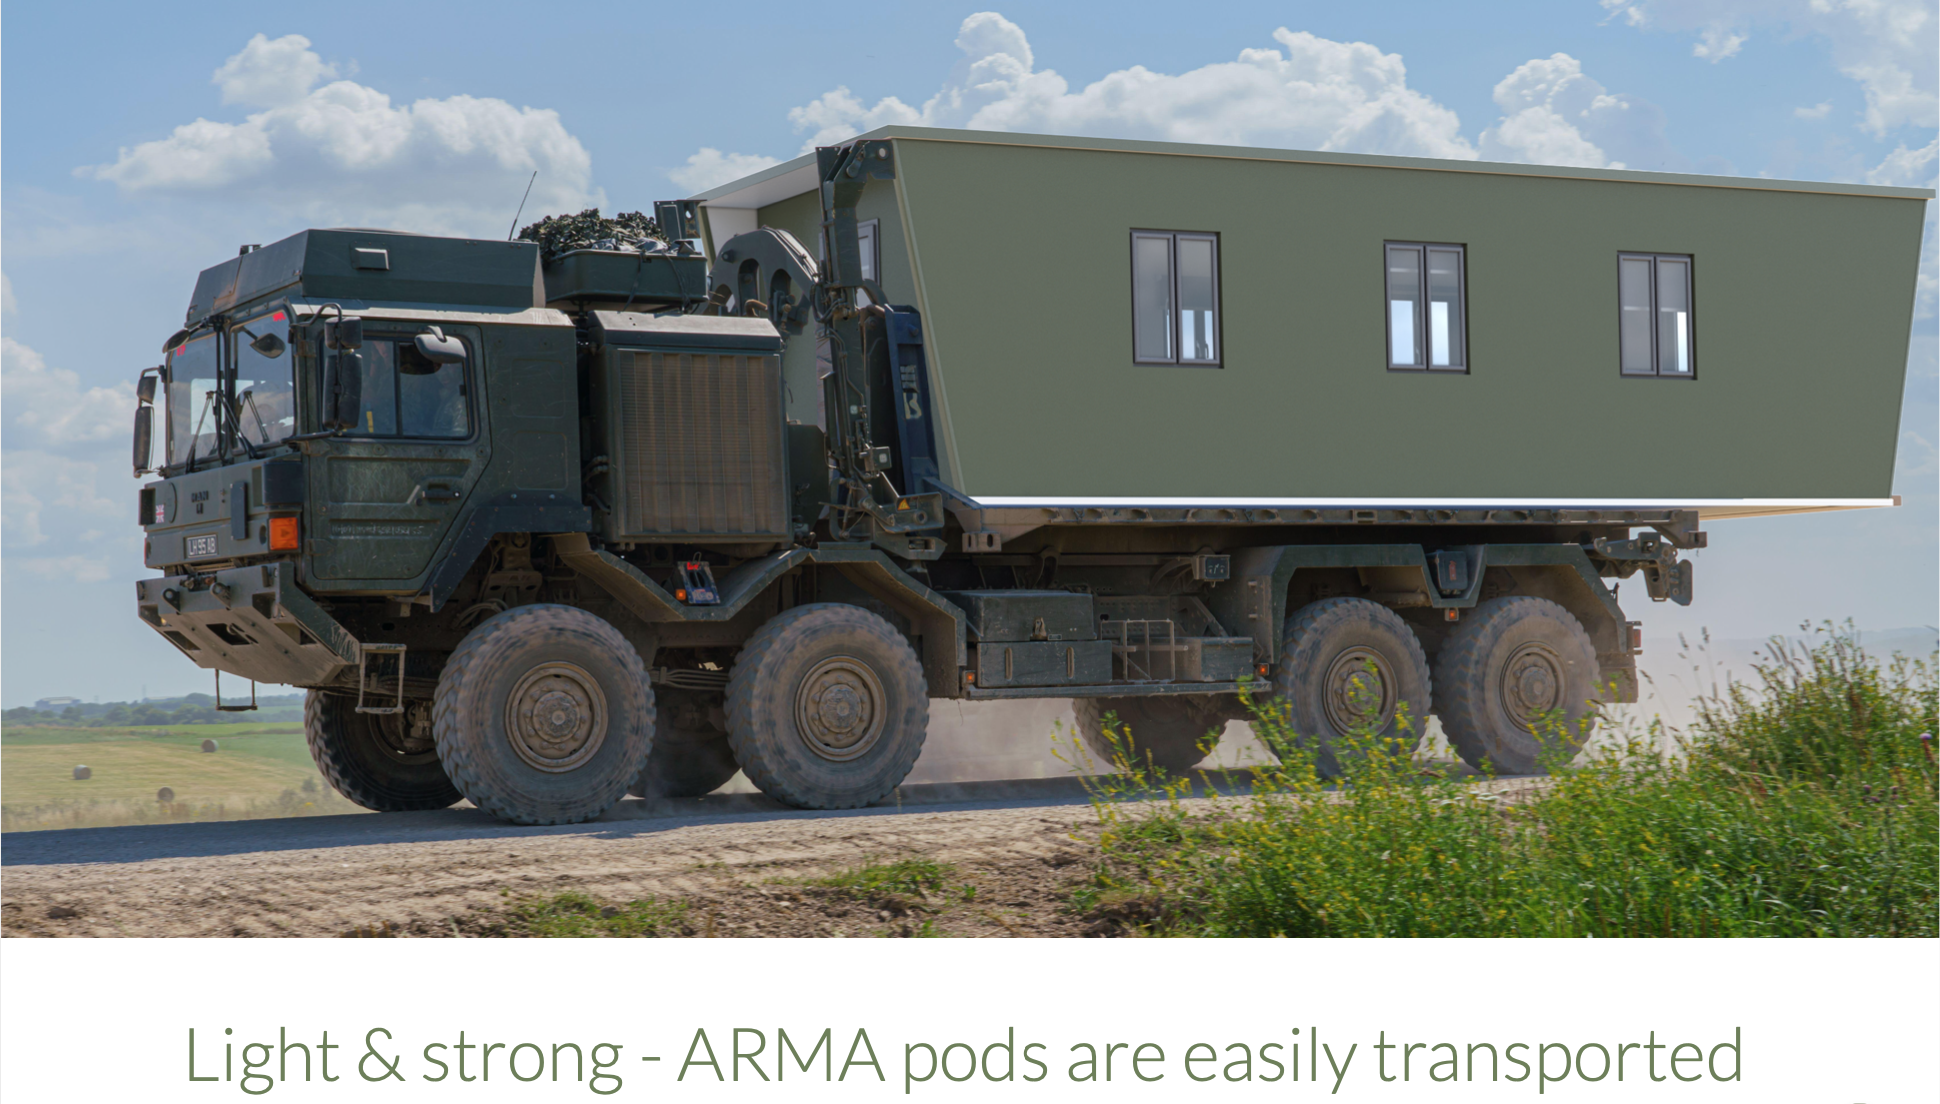 ARMA pods are easily transported